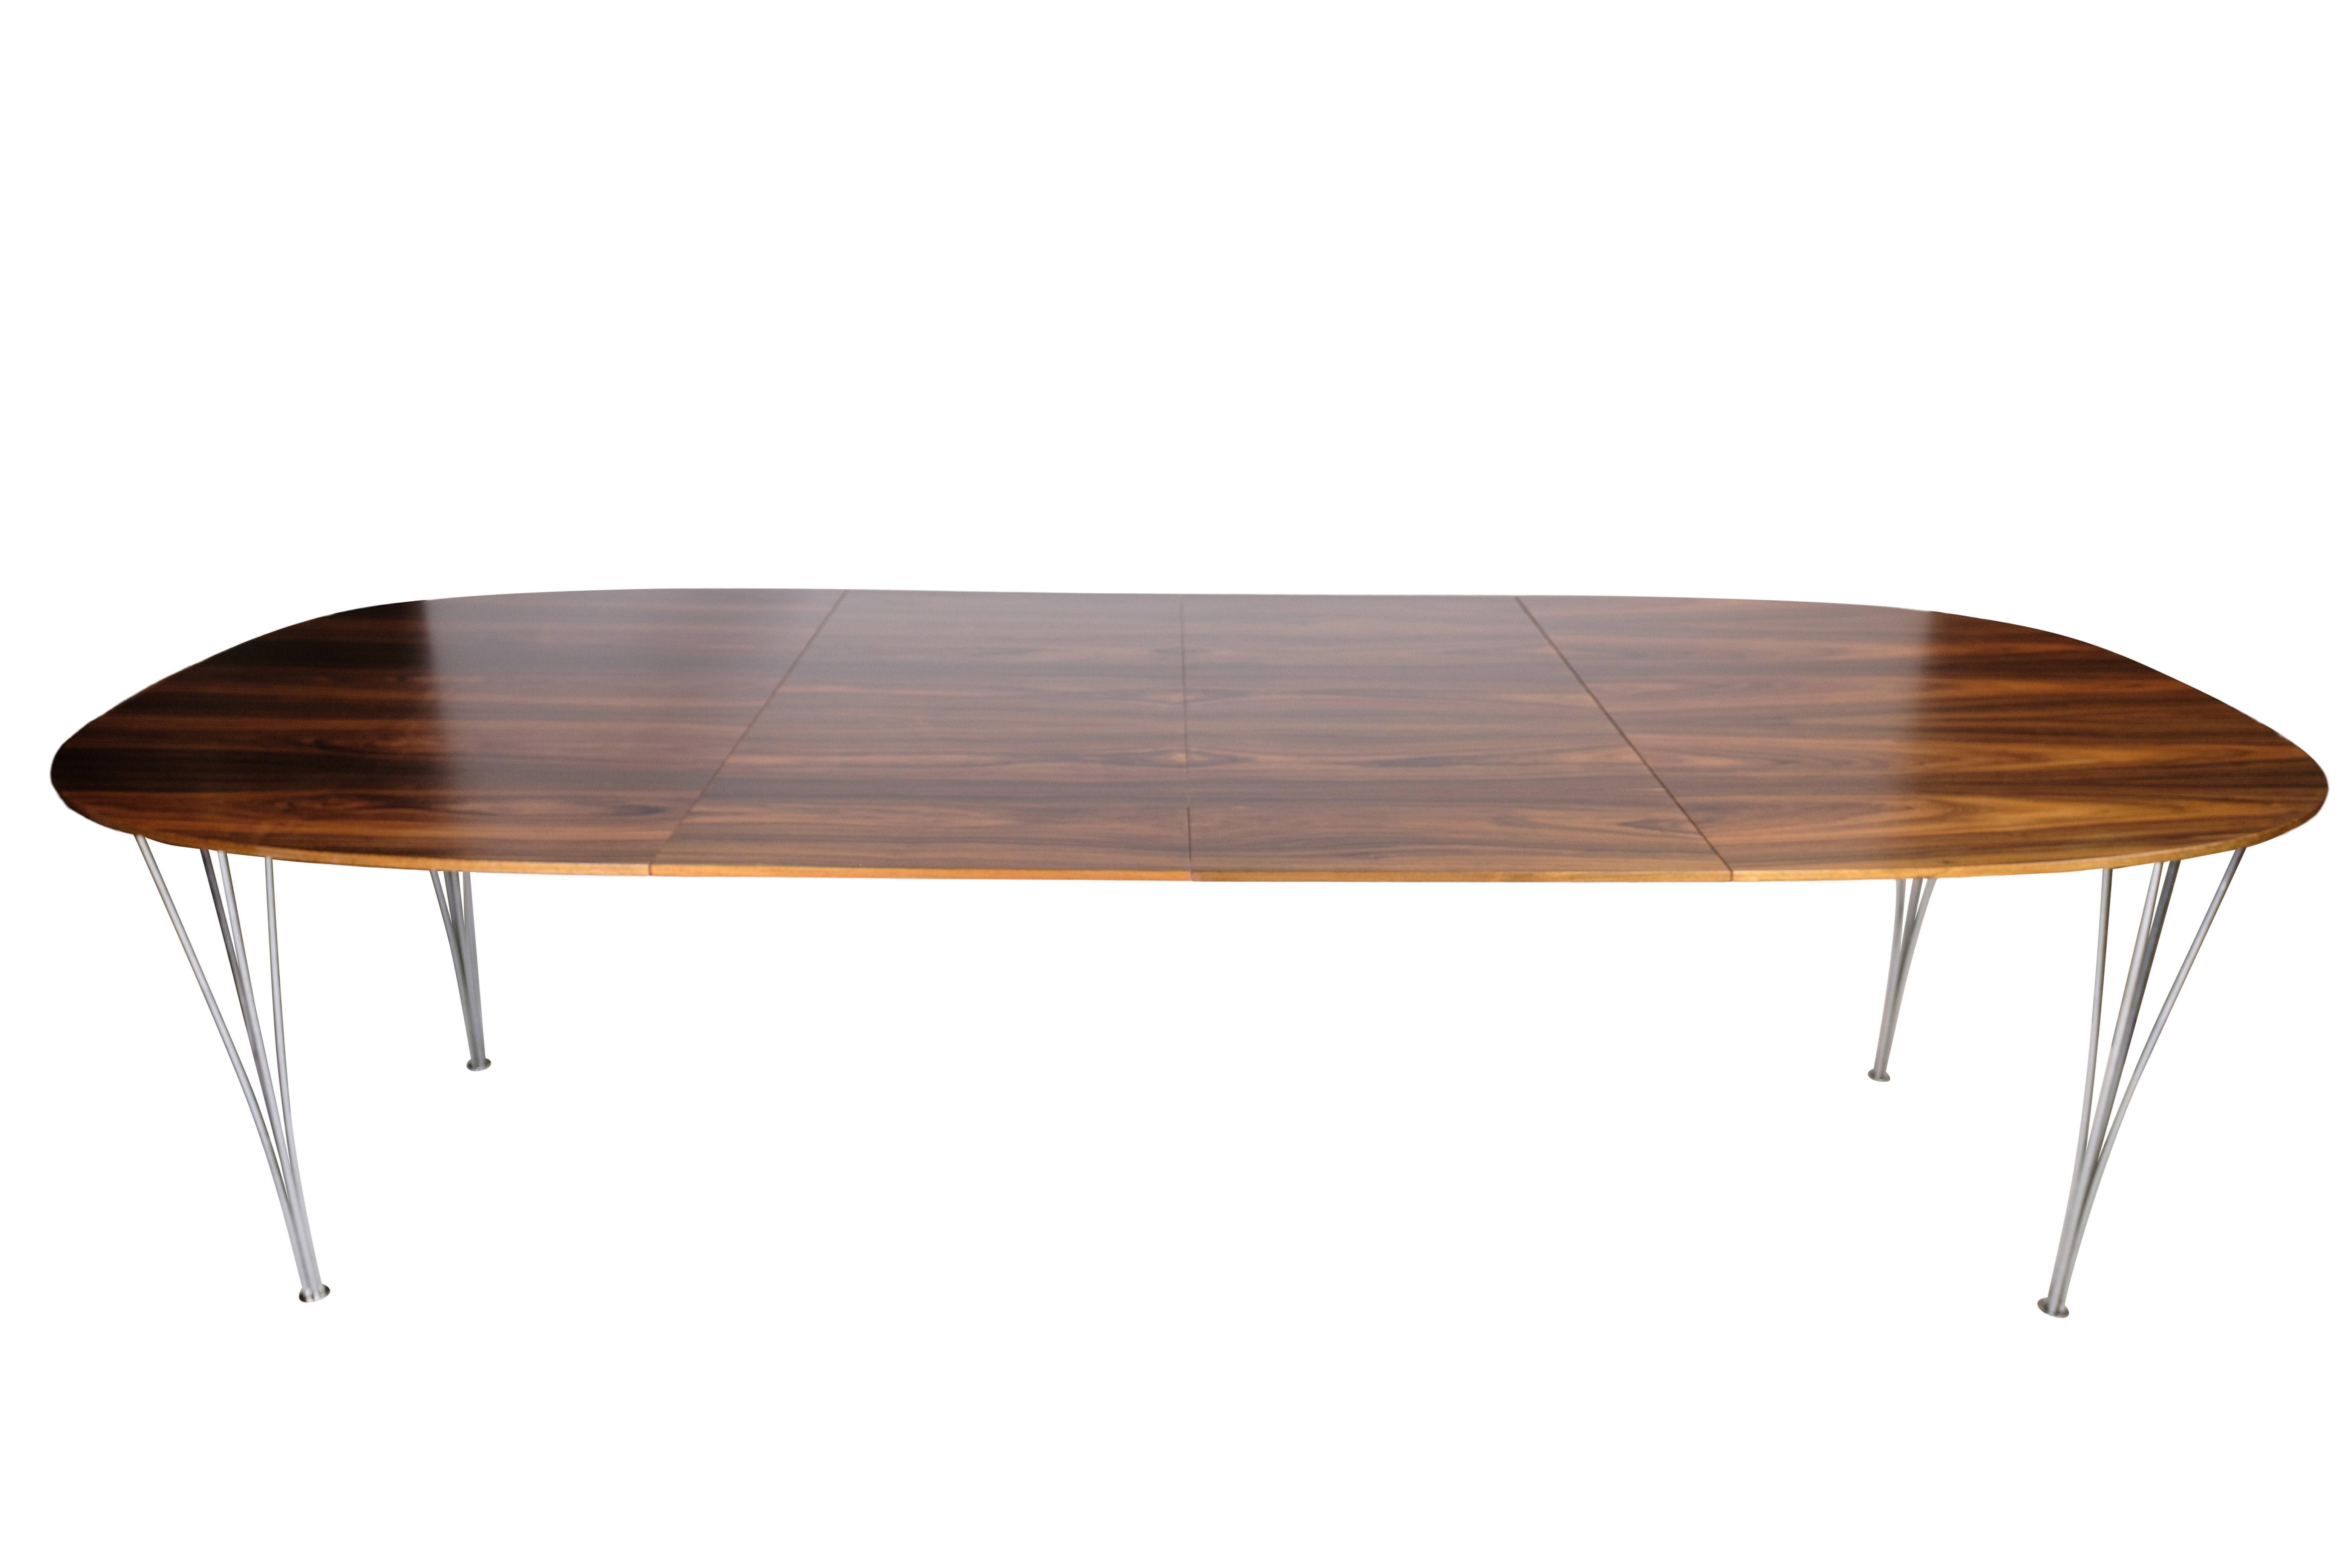 This dining table, designed by Piet Hein and Bruno Mathsson, exemplifies the timeless elegance and functional design characteristic of mid-century modern furniture. Produced by Fritz Hansen in the 1960s, the table features a beautiful rosewood